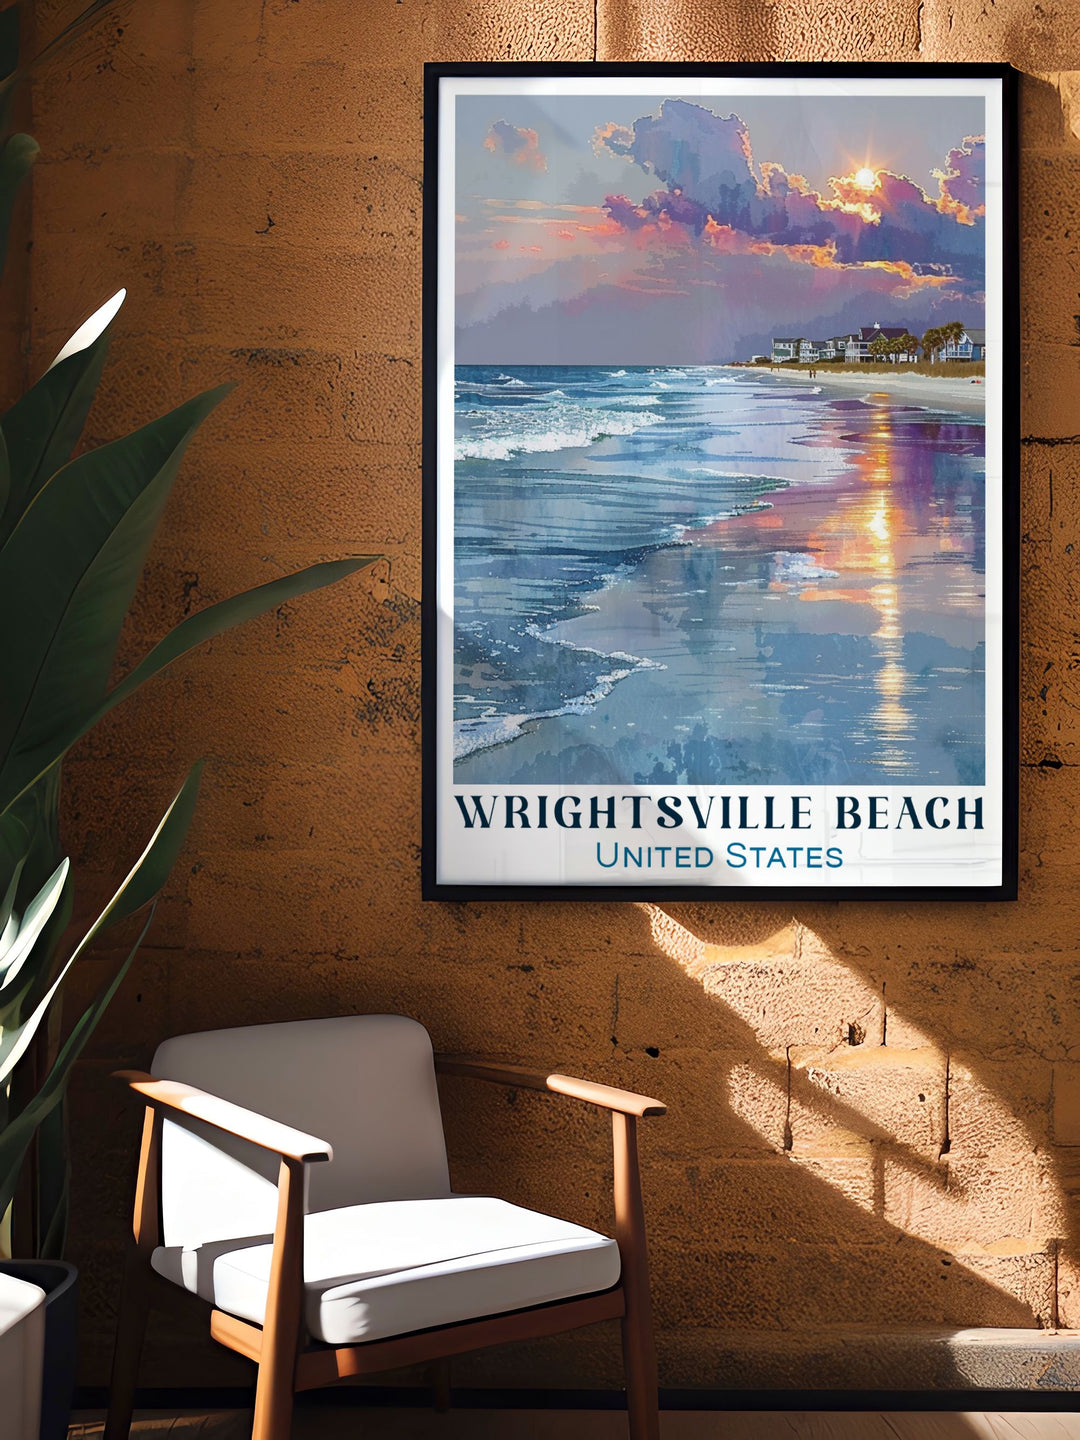 Framed art featuring Wrightsville Beach, capturing the beachs stunning landscapes and vibrant community. Ideal for adding a sense of coastal charm and natural beauty to your living space, celebrating North Carolinas iconic beach destination.